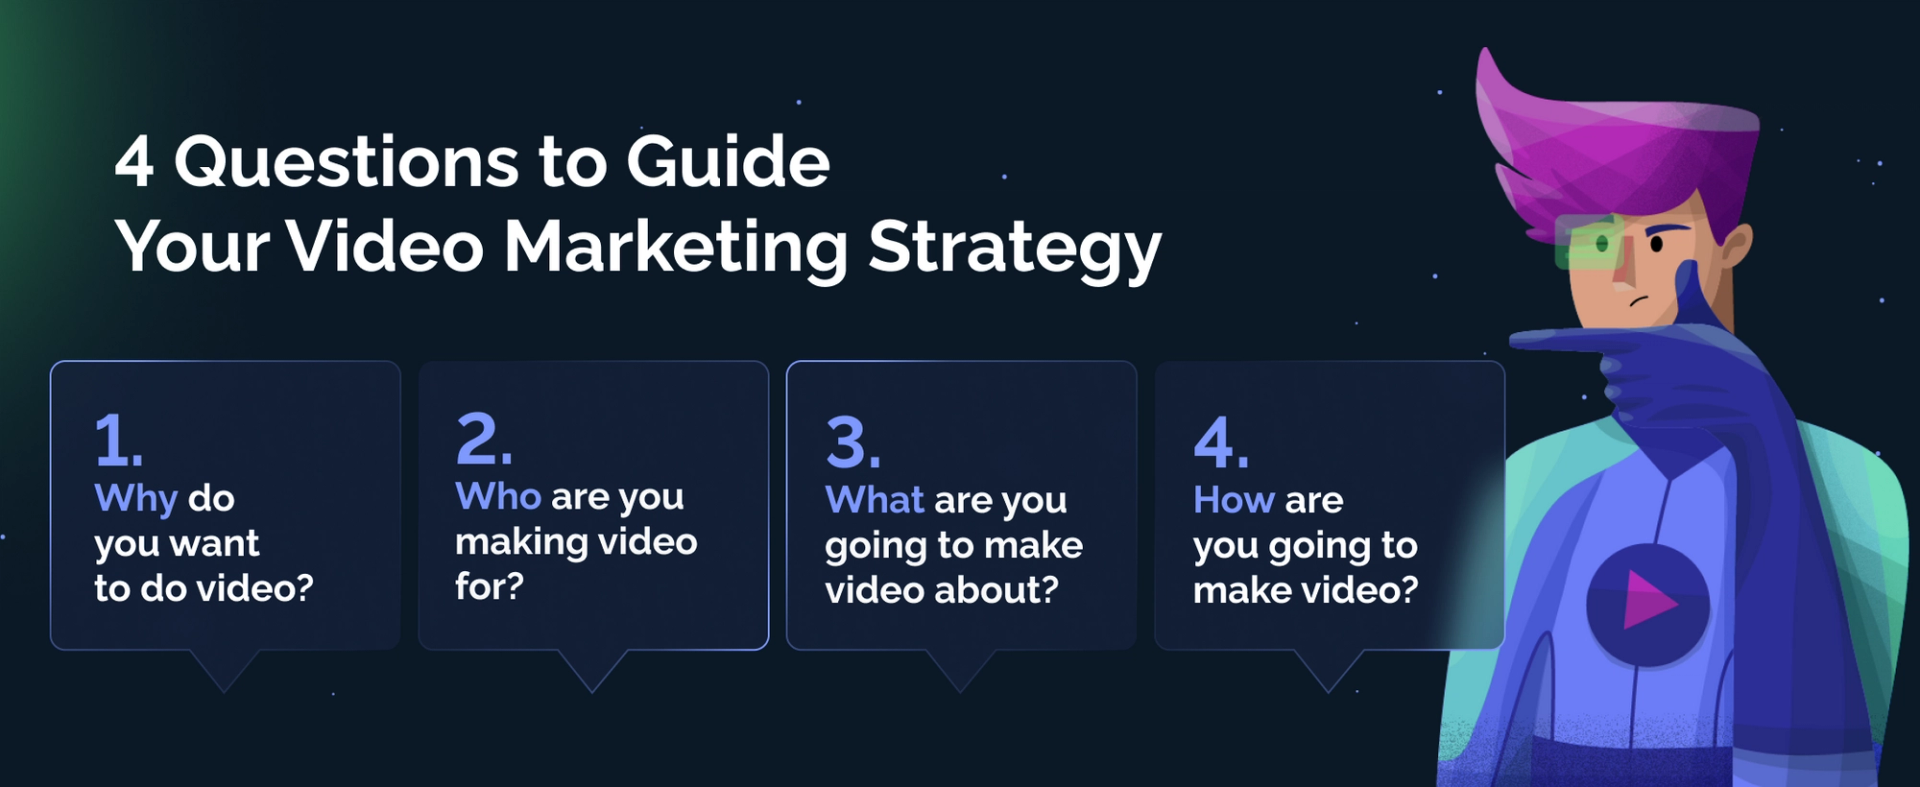 4 Questions to Guide Your Video Marketing Strategy